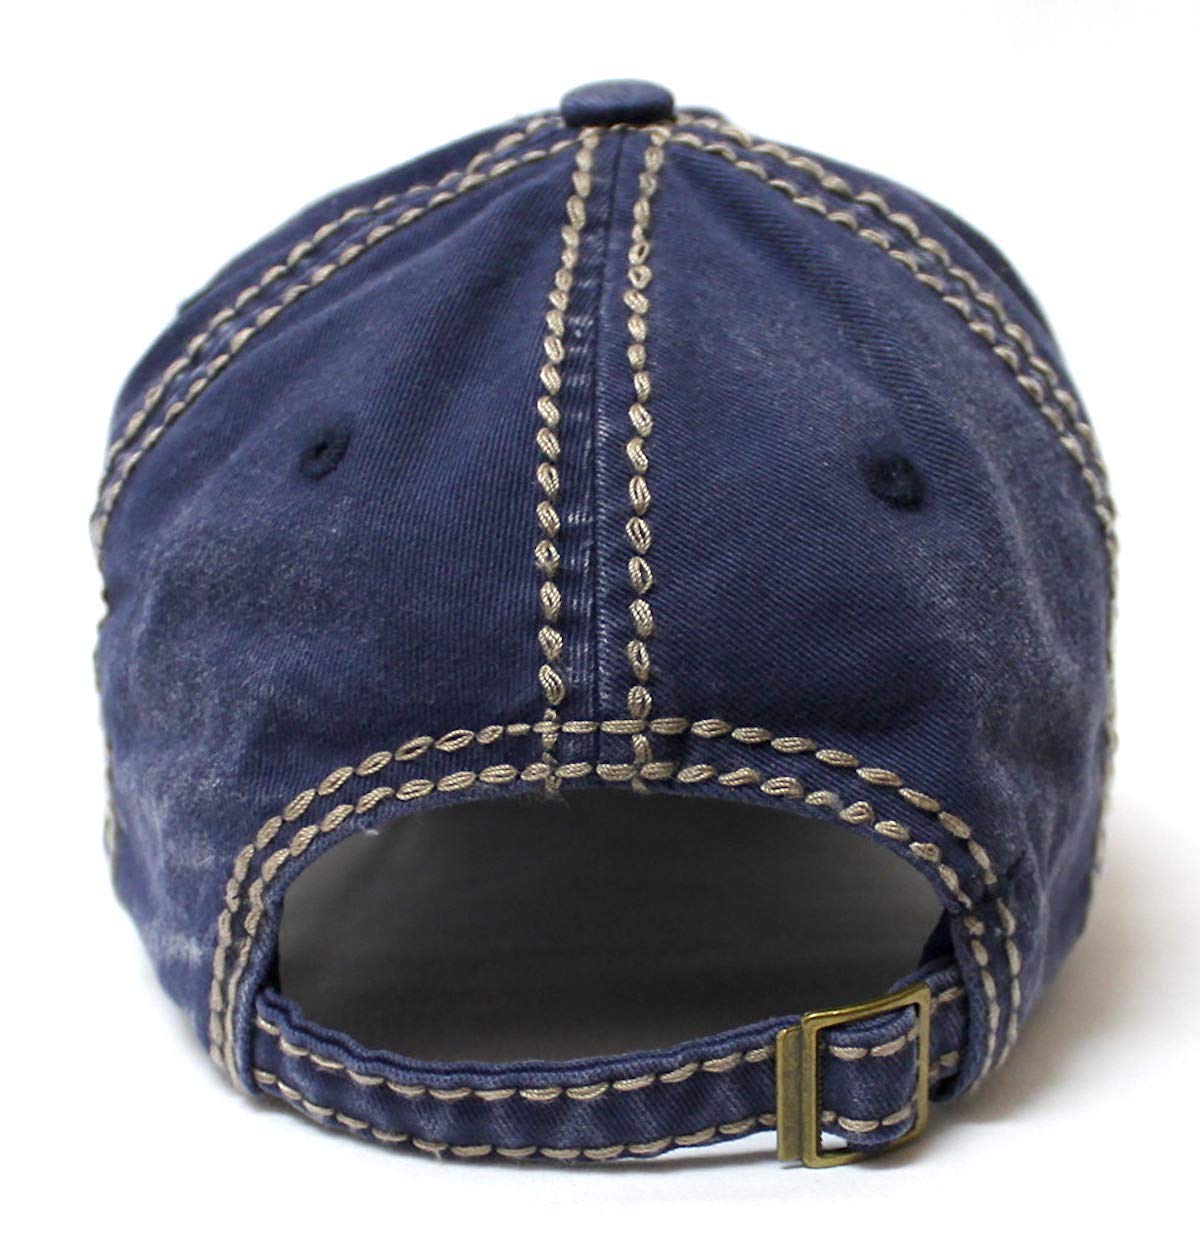 Classic Varsity Ball Cap Life Begins After Coffee Patch Embroidery Hat, Navy Blue - Caps 'N Vintage 